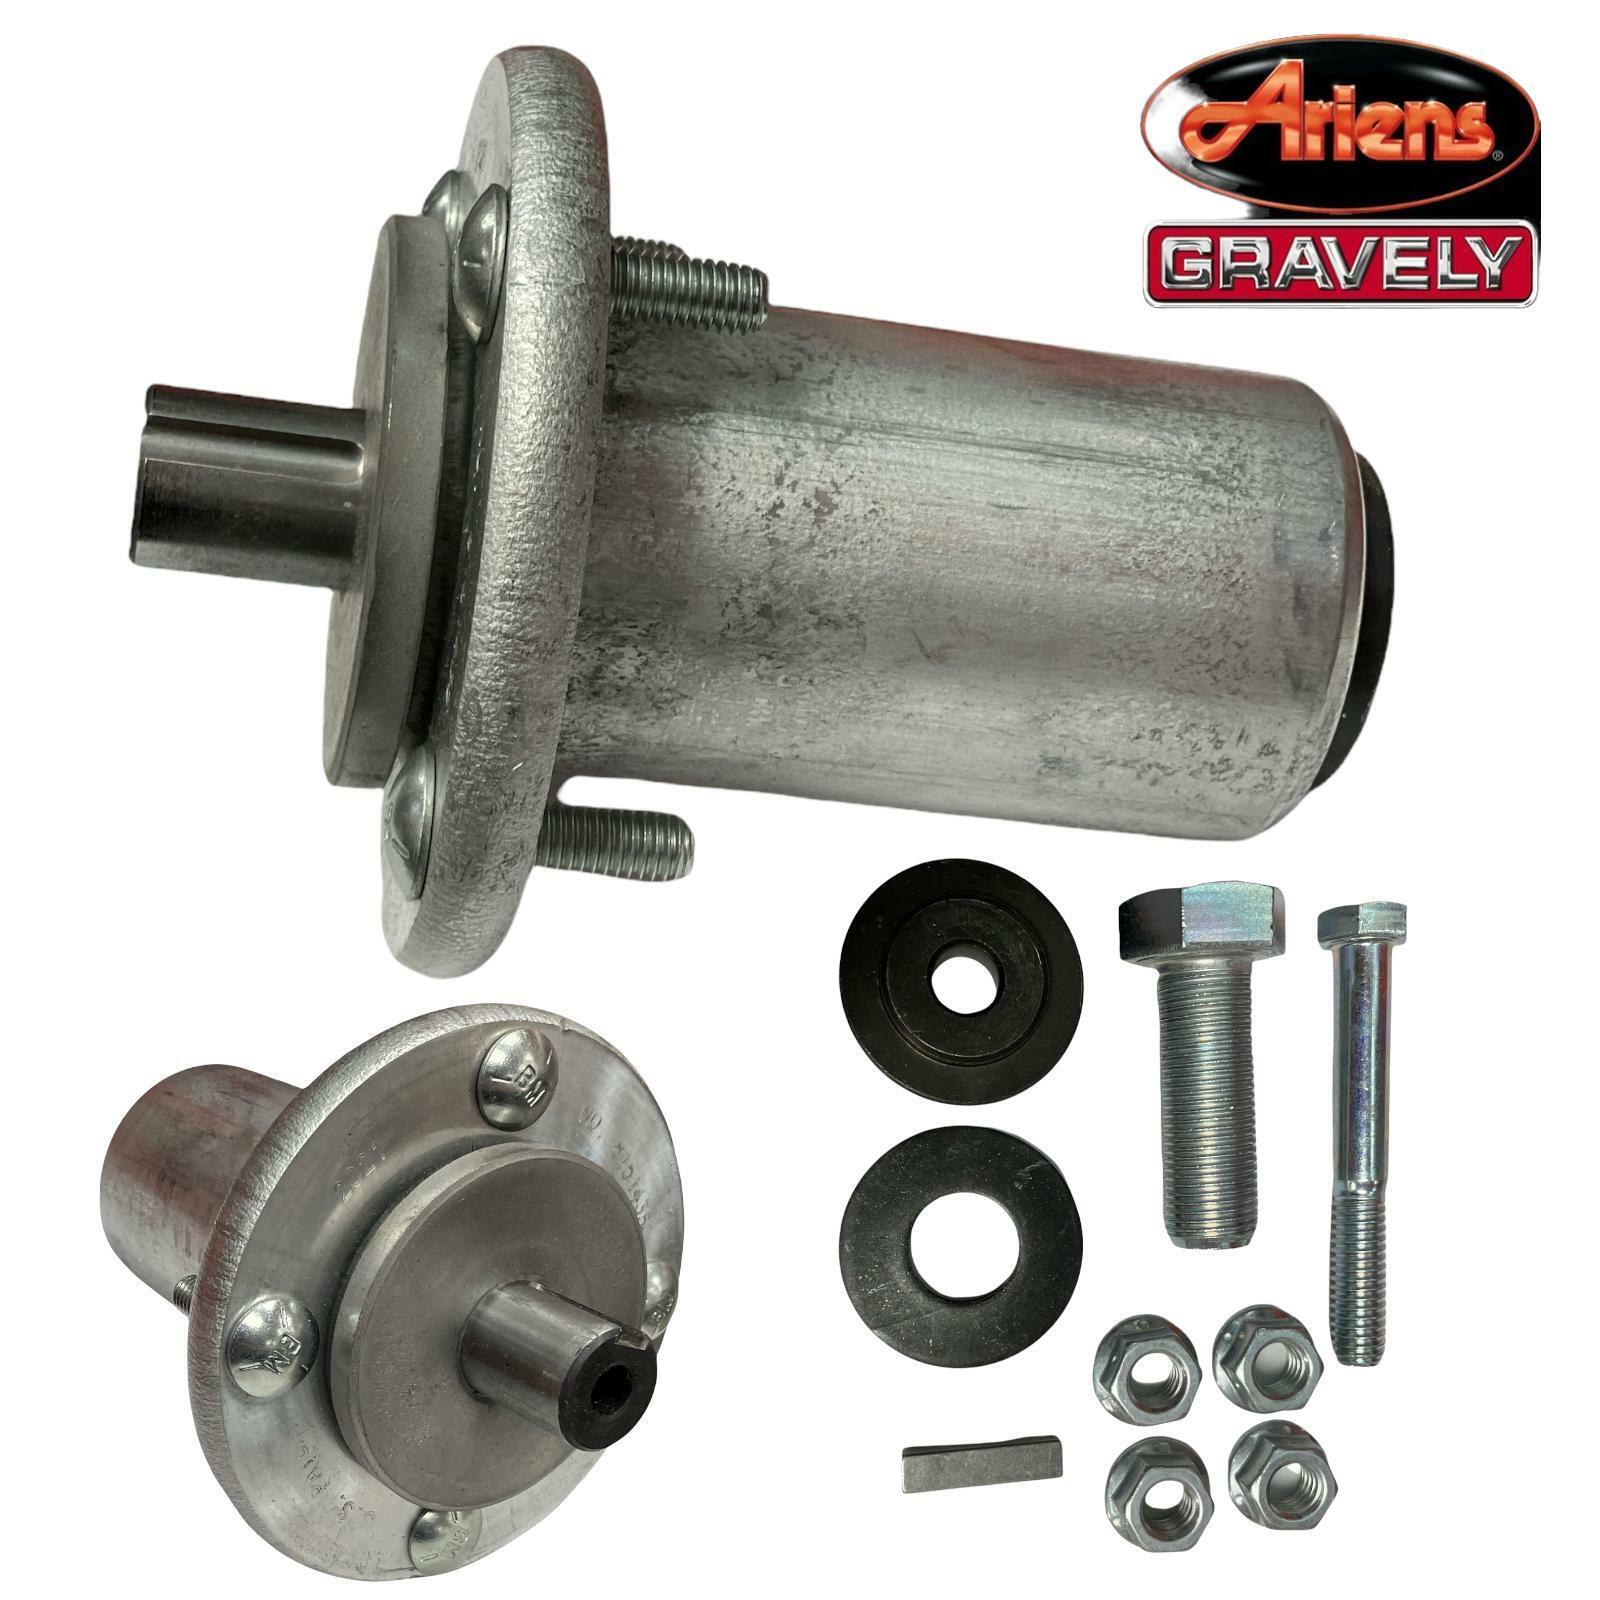 Ariens Gravely 58810800 59109800 Assembly MAINT FREE ALUM SPINDLE